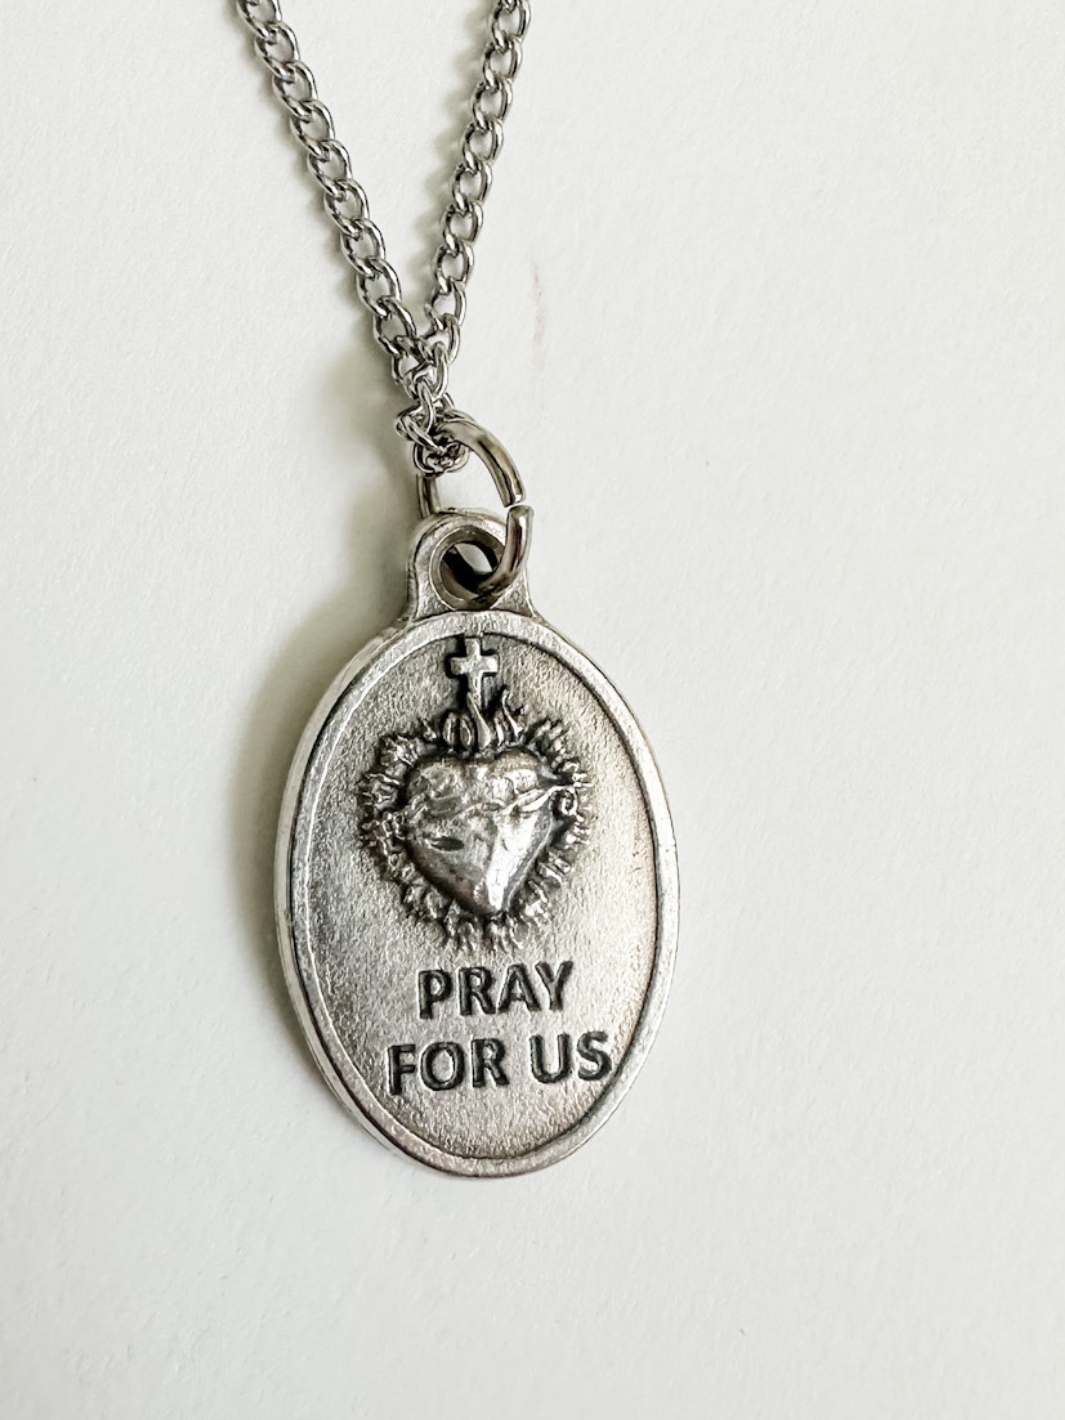 St. Tarcisius Medal Necklace